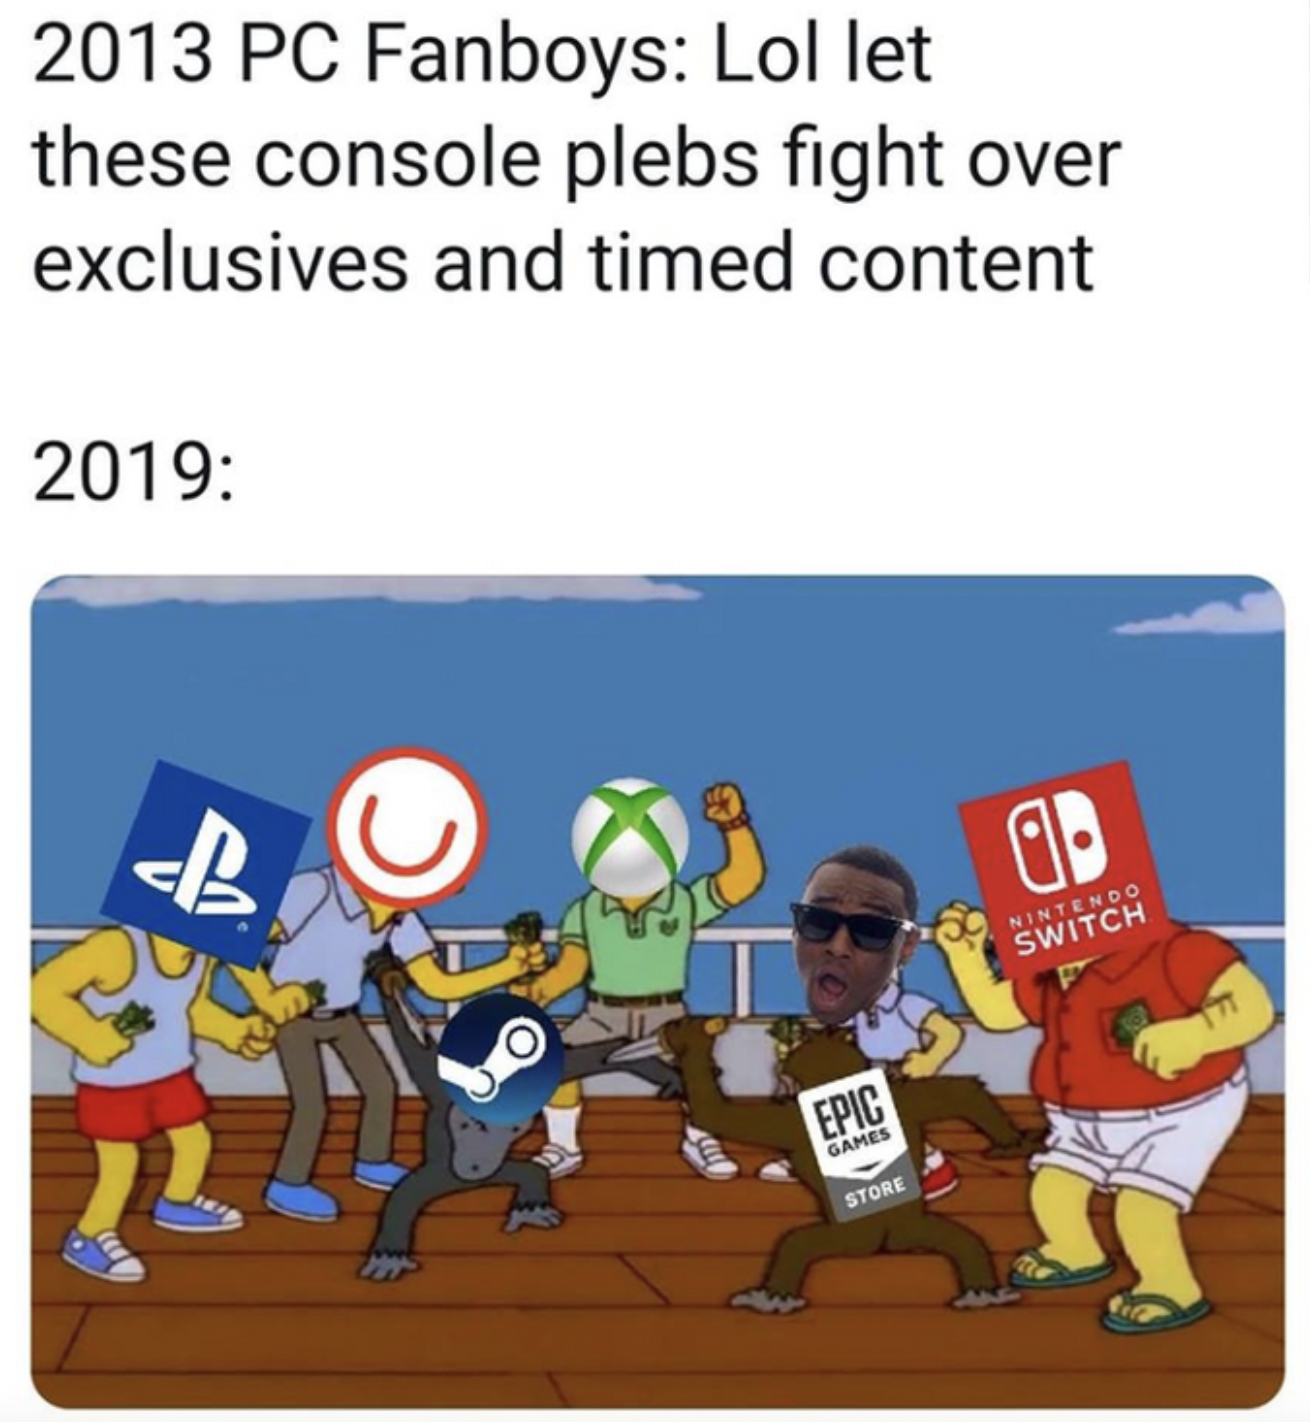 PC Gaming Memes - furious george simpsons - 2013 Pc Fanboys Lol let these console plebs fight over exclusives and timed content 2019 A Epic Games Store a Nintendo Switch